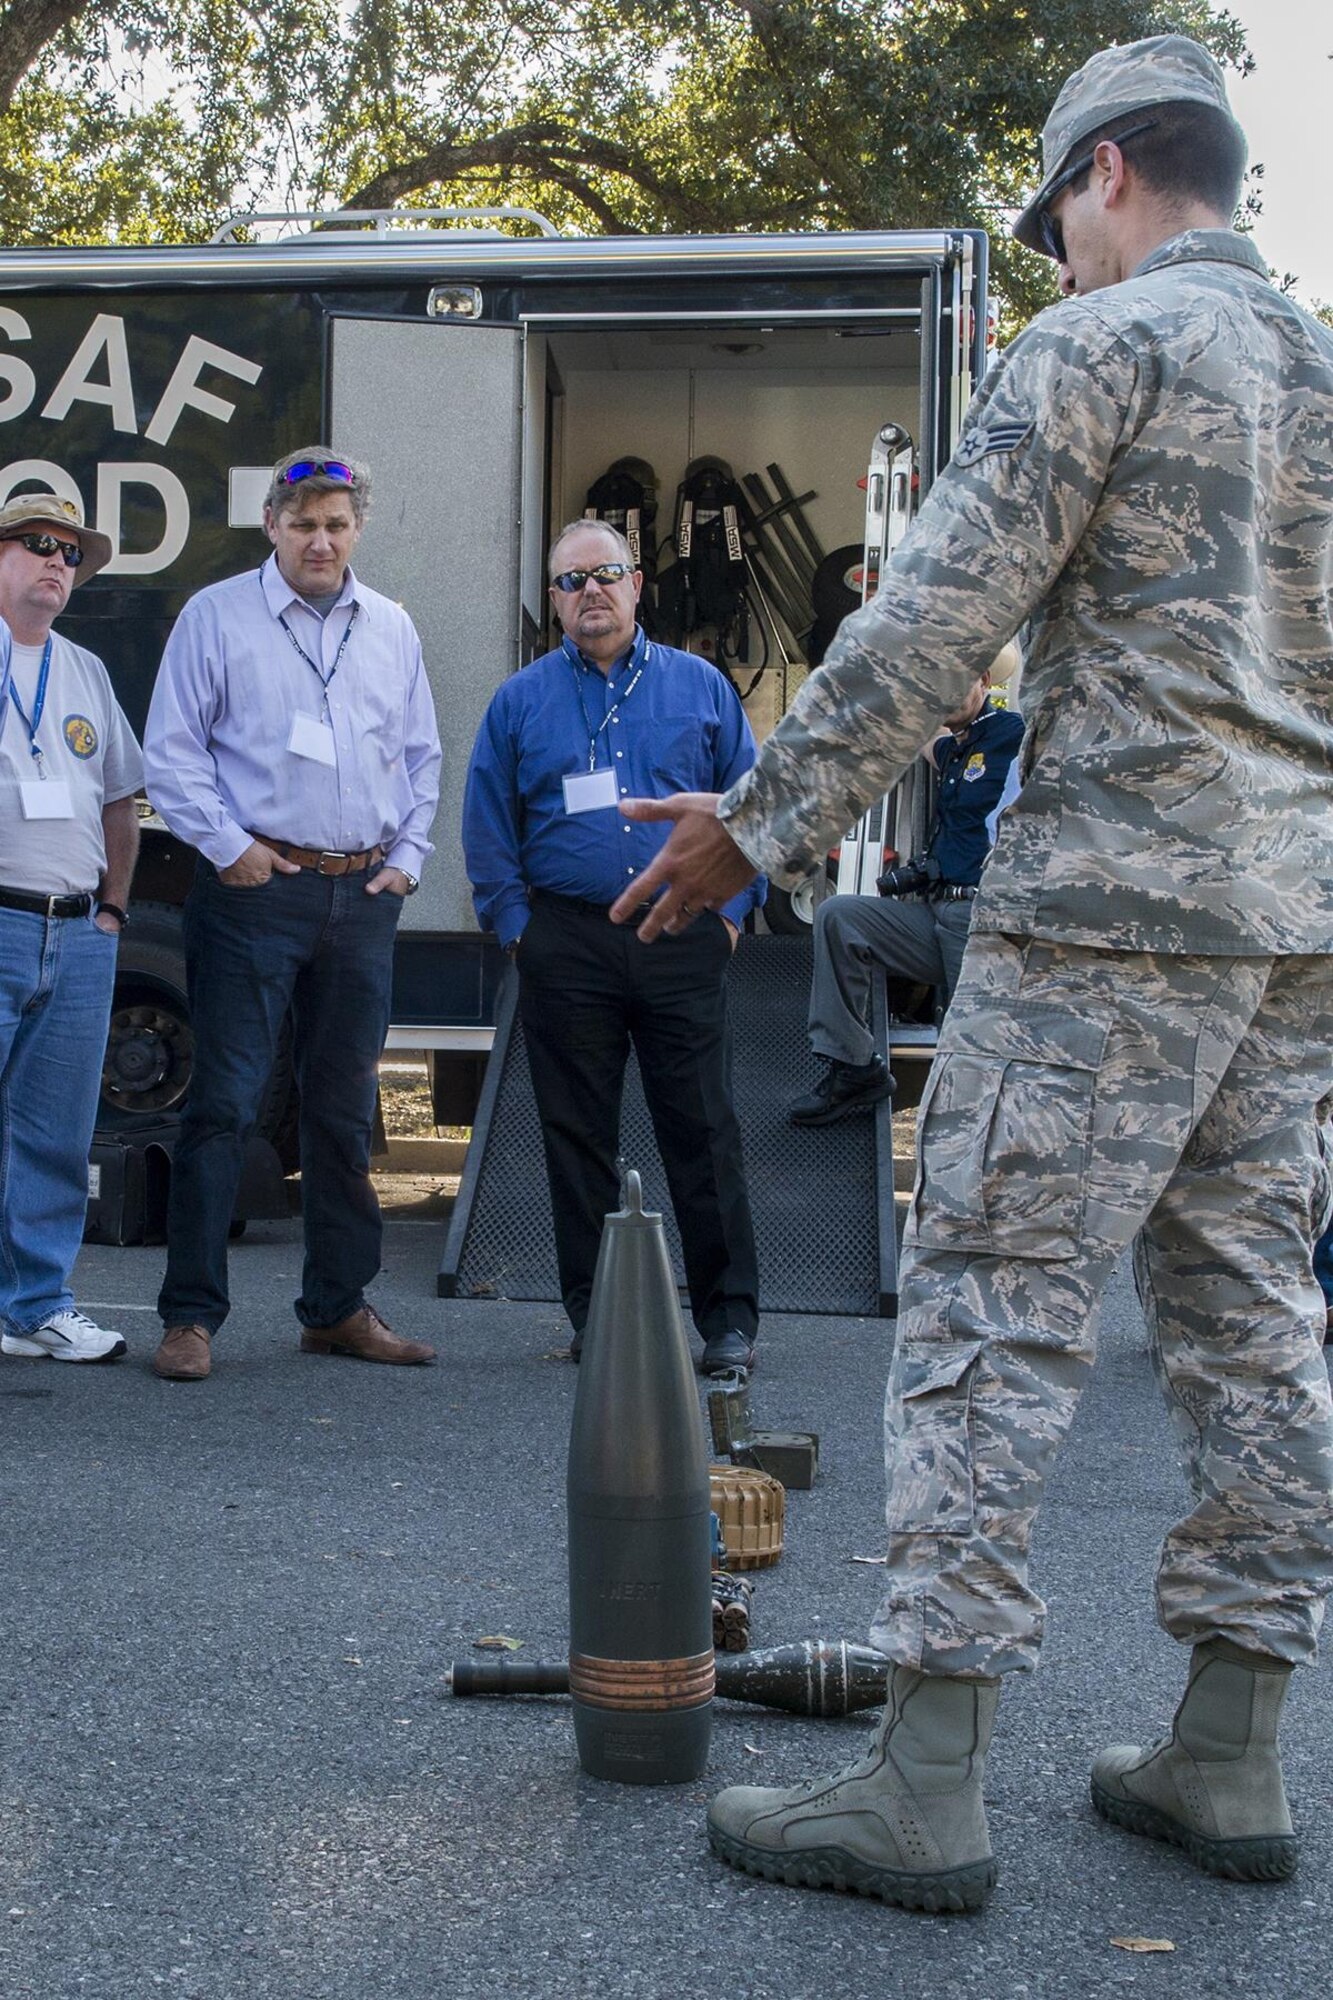 A group of civic leaders get a briefing by an 2nd Bomb Wing Explosive Ordnance Disposal team member during a tour at Barksdale Air Force Base, La., Oct. 27, 2016. The tour was hosted by the 433rd Airlift Wing from Lackland Air Force Base, Texas, and travel to Barksdale to get first hand look at the different missions throughout the Air Force Reserve Command. (U.S. Air Force photo by Master Sgt. Greg Steele/Released)